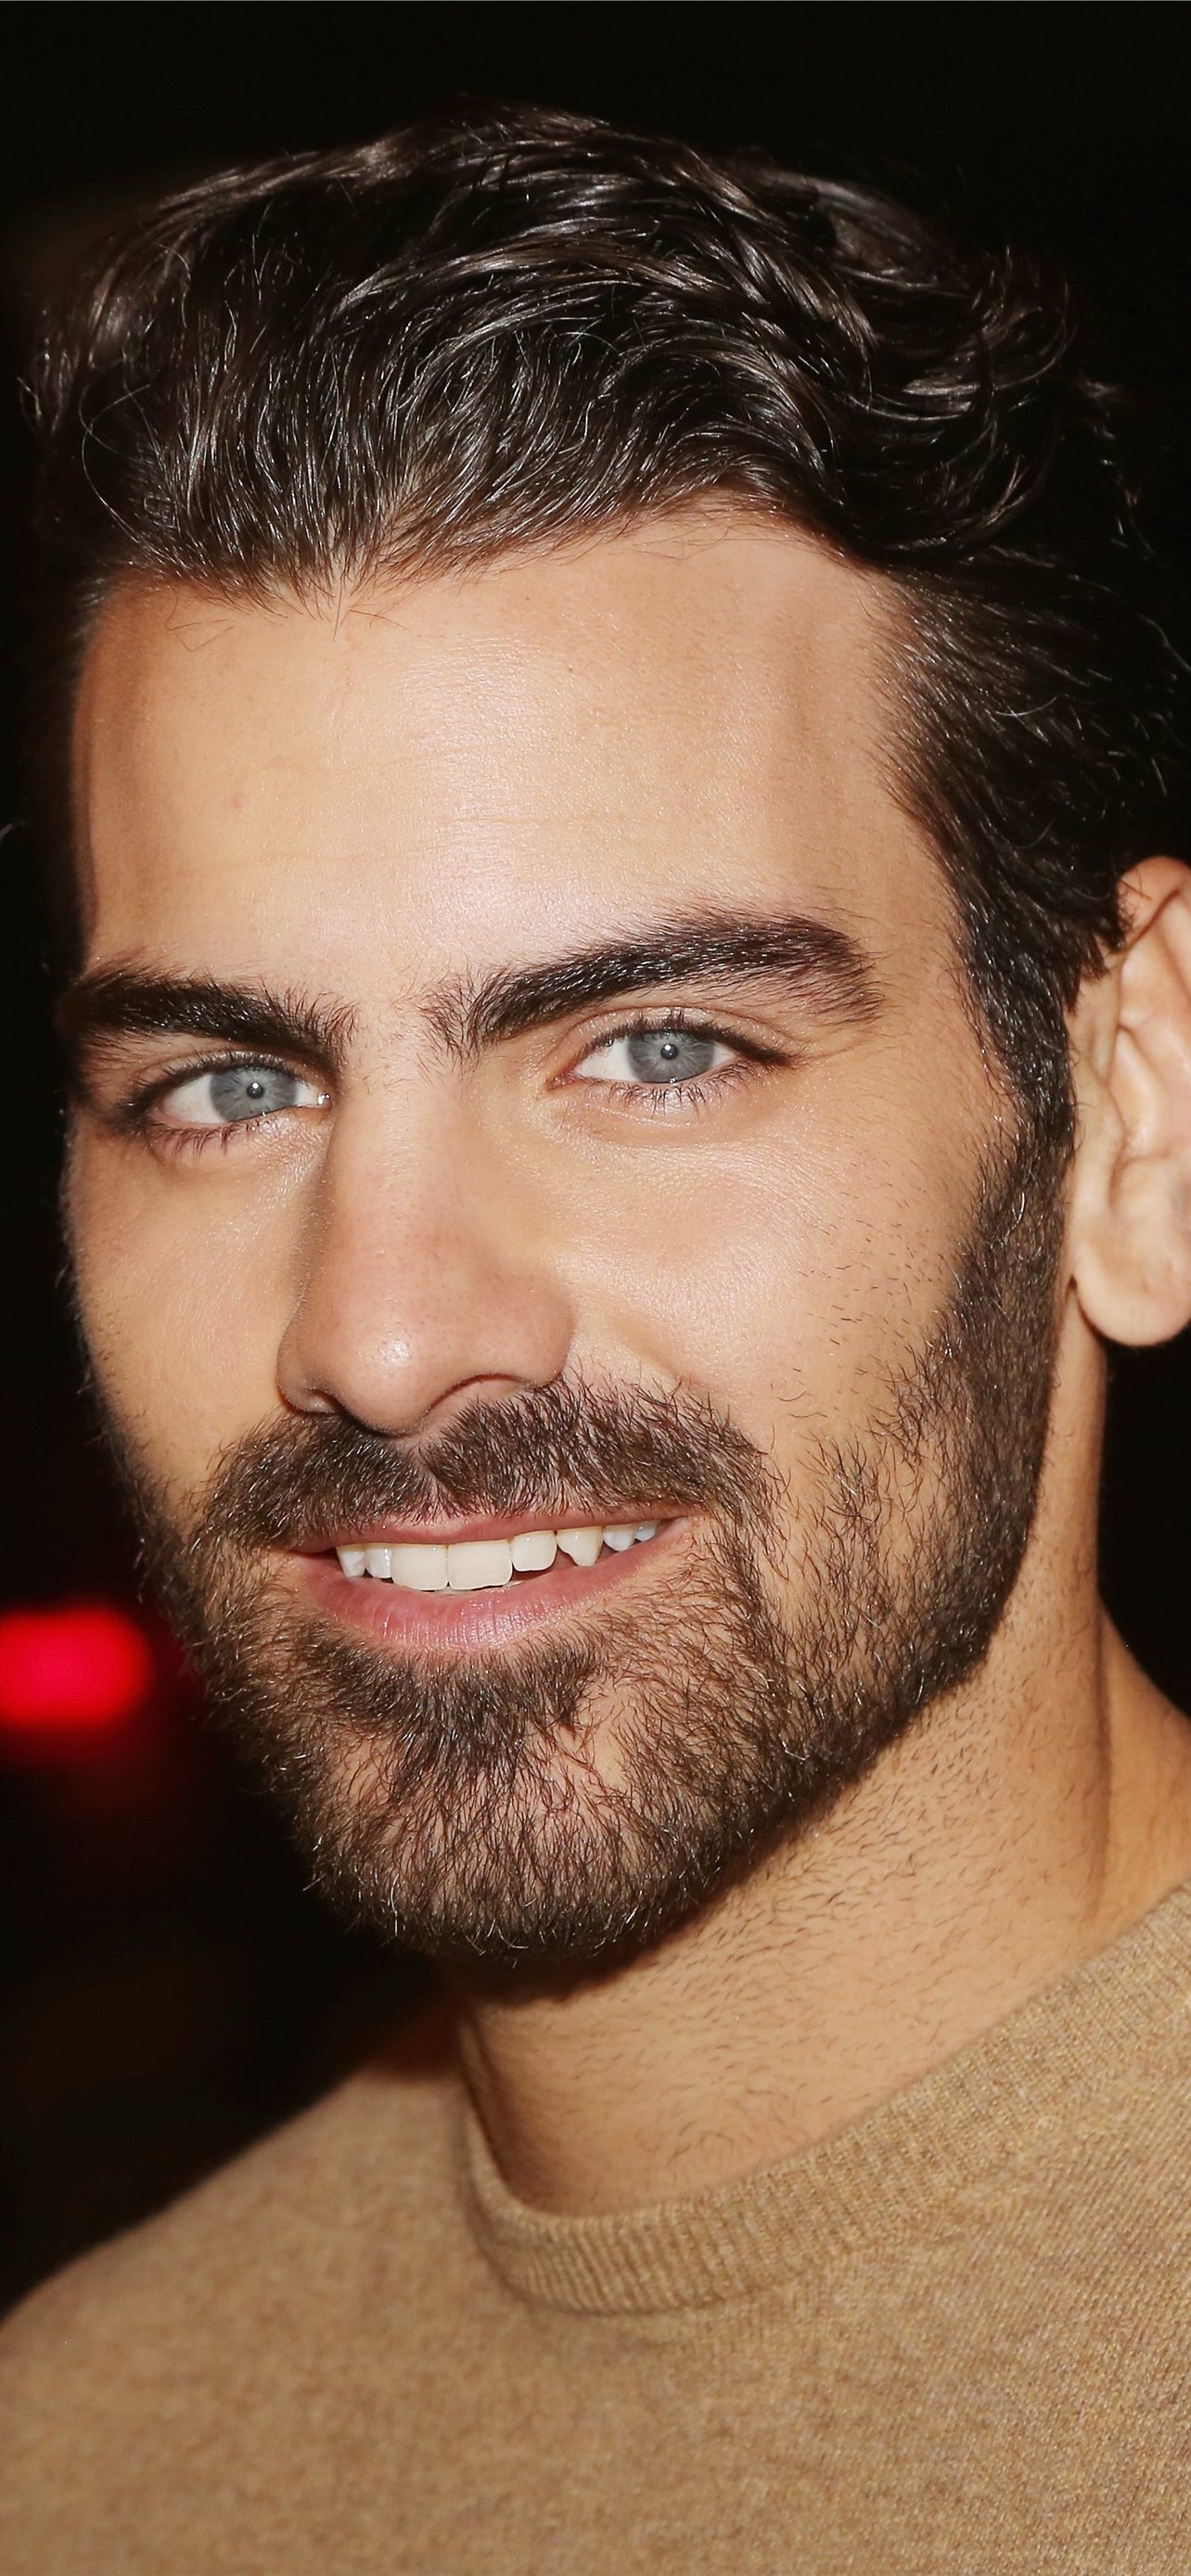 America's Next Top Model, Nyle DiMarco, iPhone wallpapers, Free download, 1290x2780 HD Phone